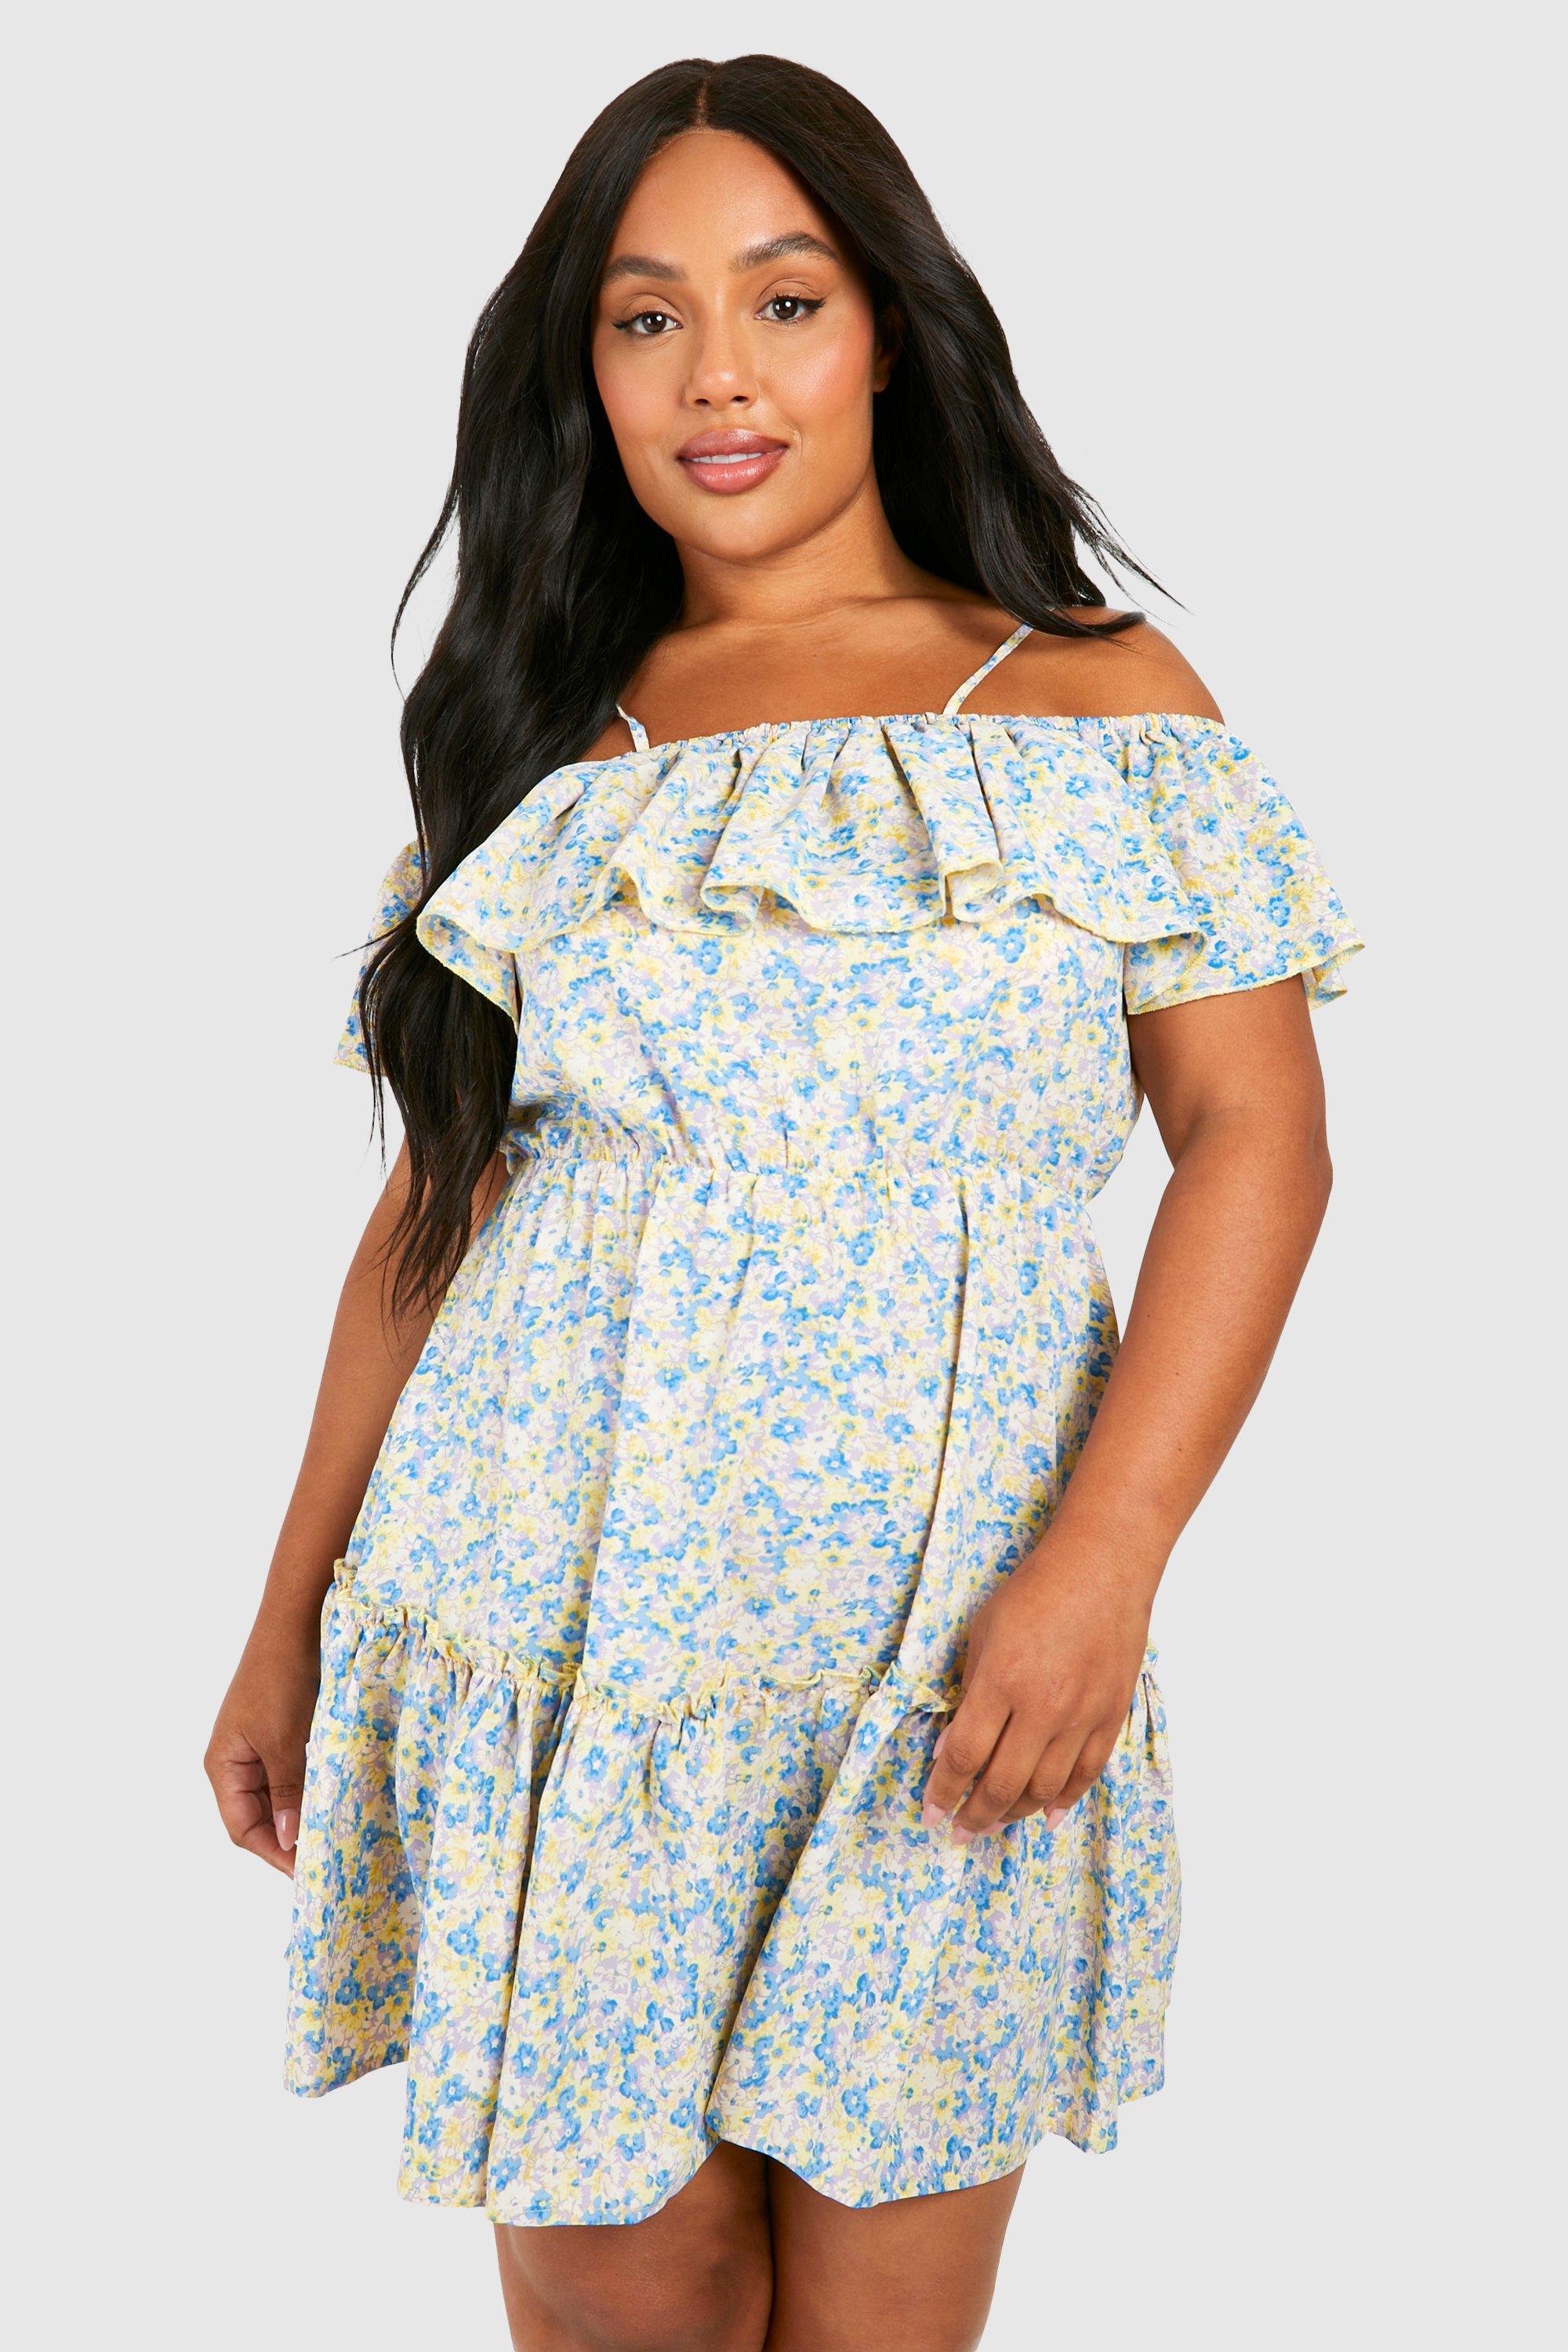 Boohoo Plus Woven Ditsy Floral Cold Shoulder Skater Dress, Yellow